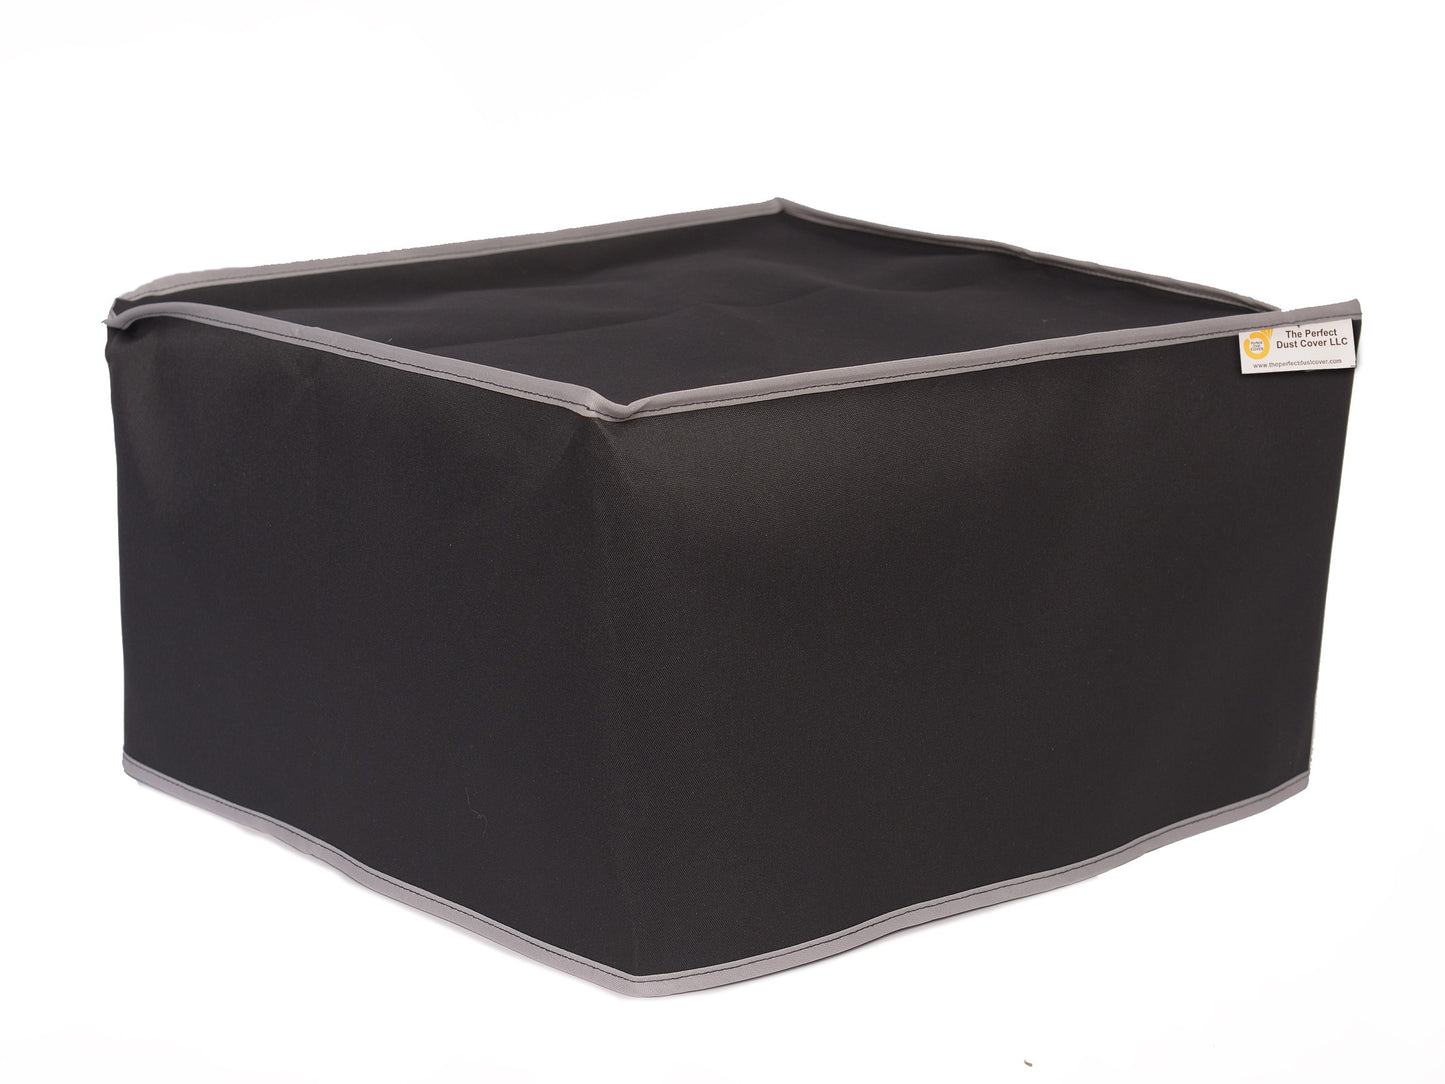 The Perfect Dust Cover, Black Nylon Cover Compatible with HP LaserJet Pro MFP 4103fdw Monochrome Laser Printer, Anti-Static and Waterproof Dust Cover by The Perfect Dust Cover LLC